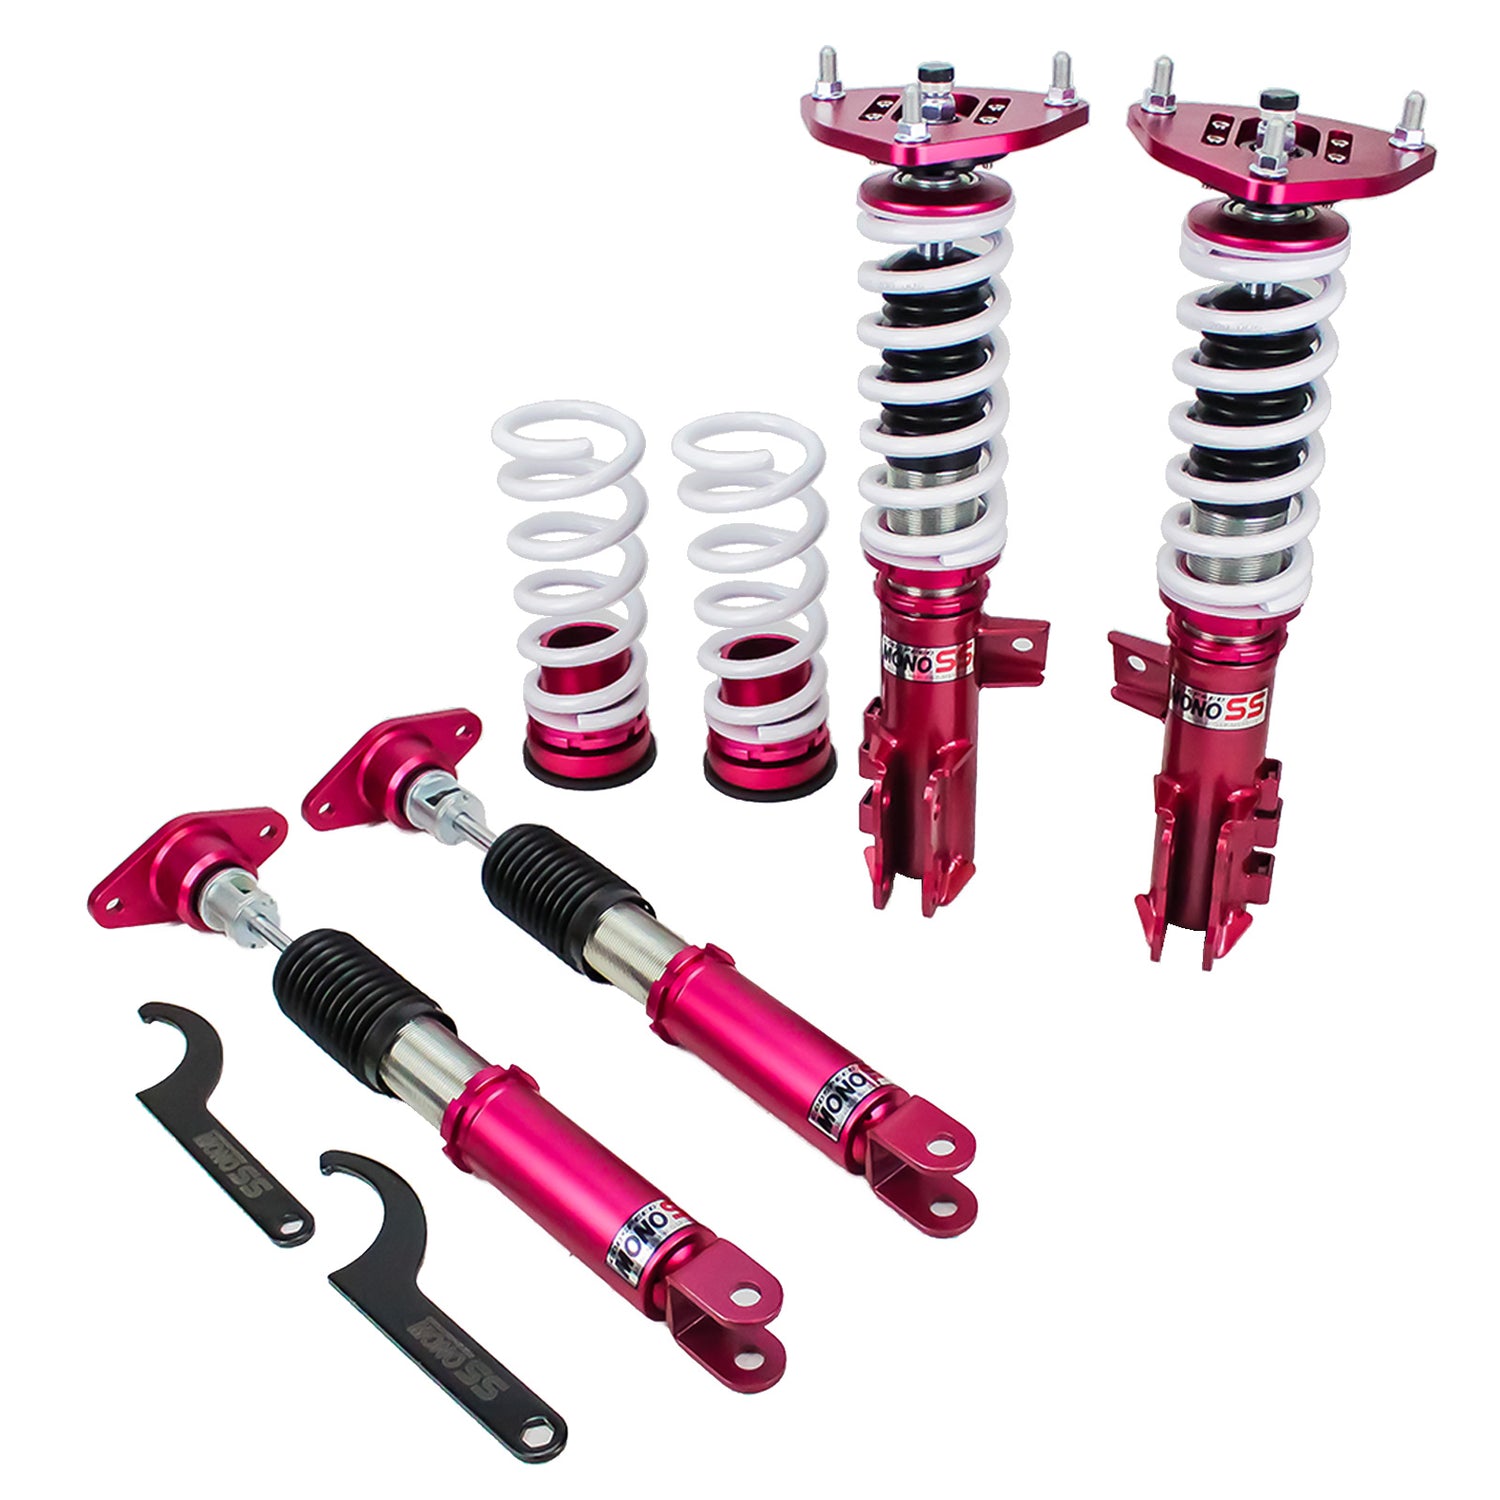 Godspeed MSS0112-A MonoSS Coilover Lowering Kit, Fully Adjustable, Ride Height, Spring Tension And 16 Click Damping, Hyundai Sonata(YF) 2011-14